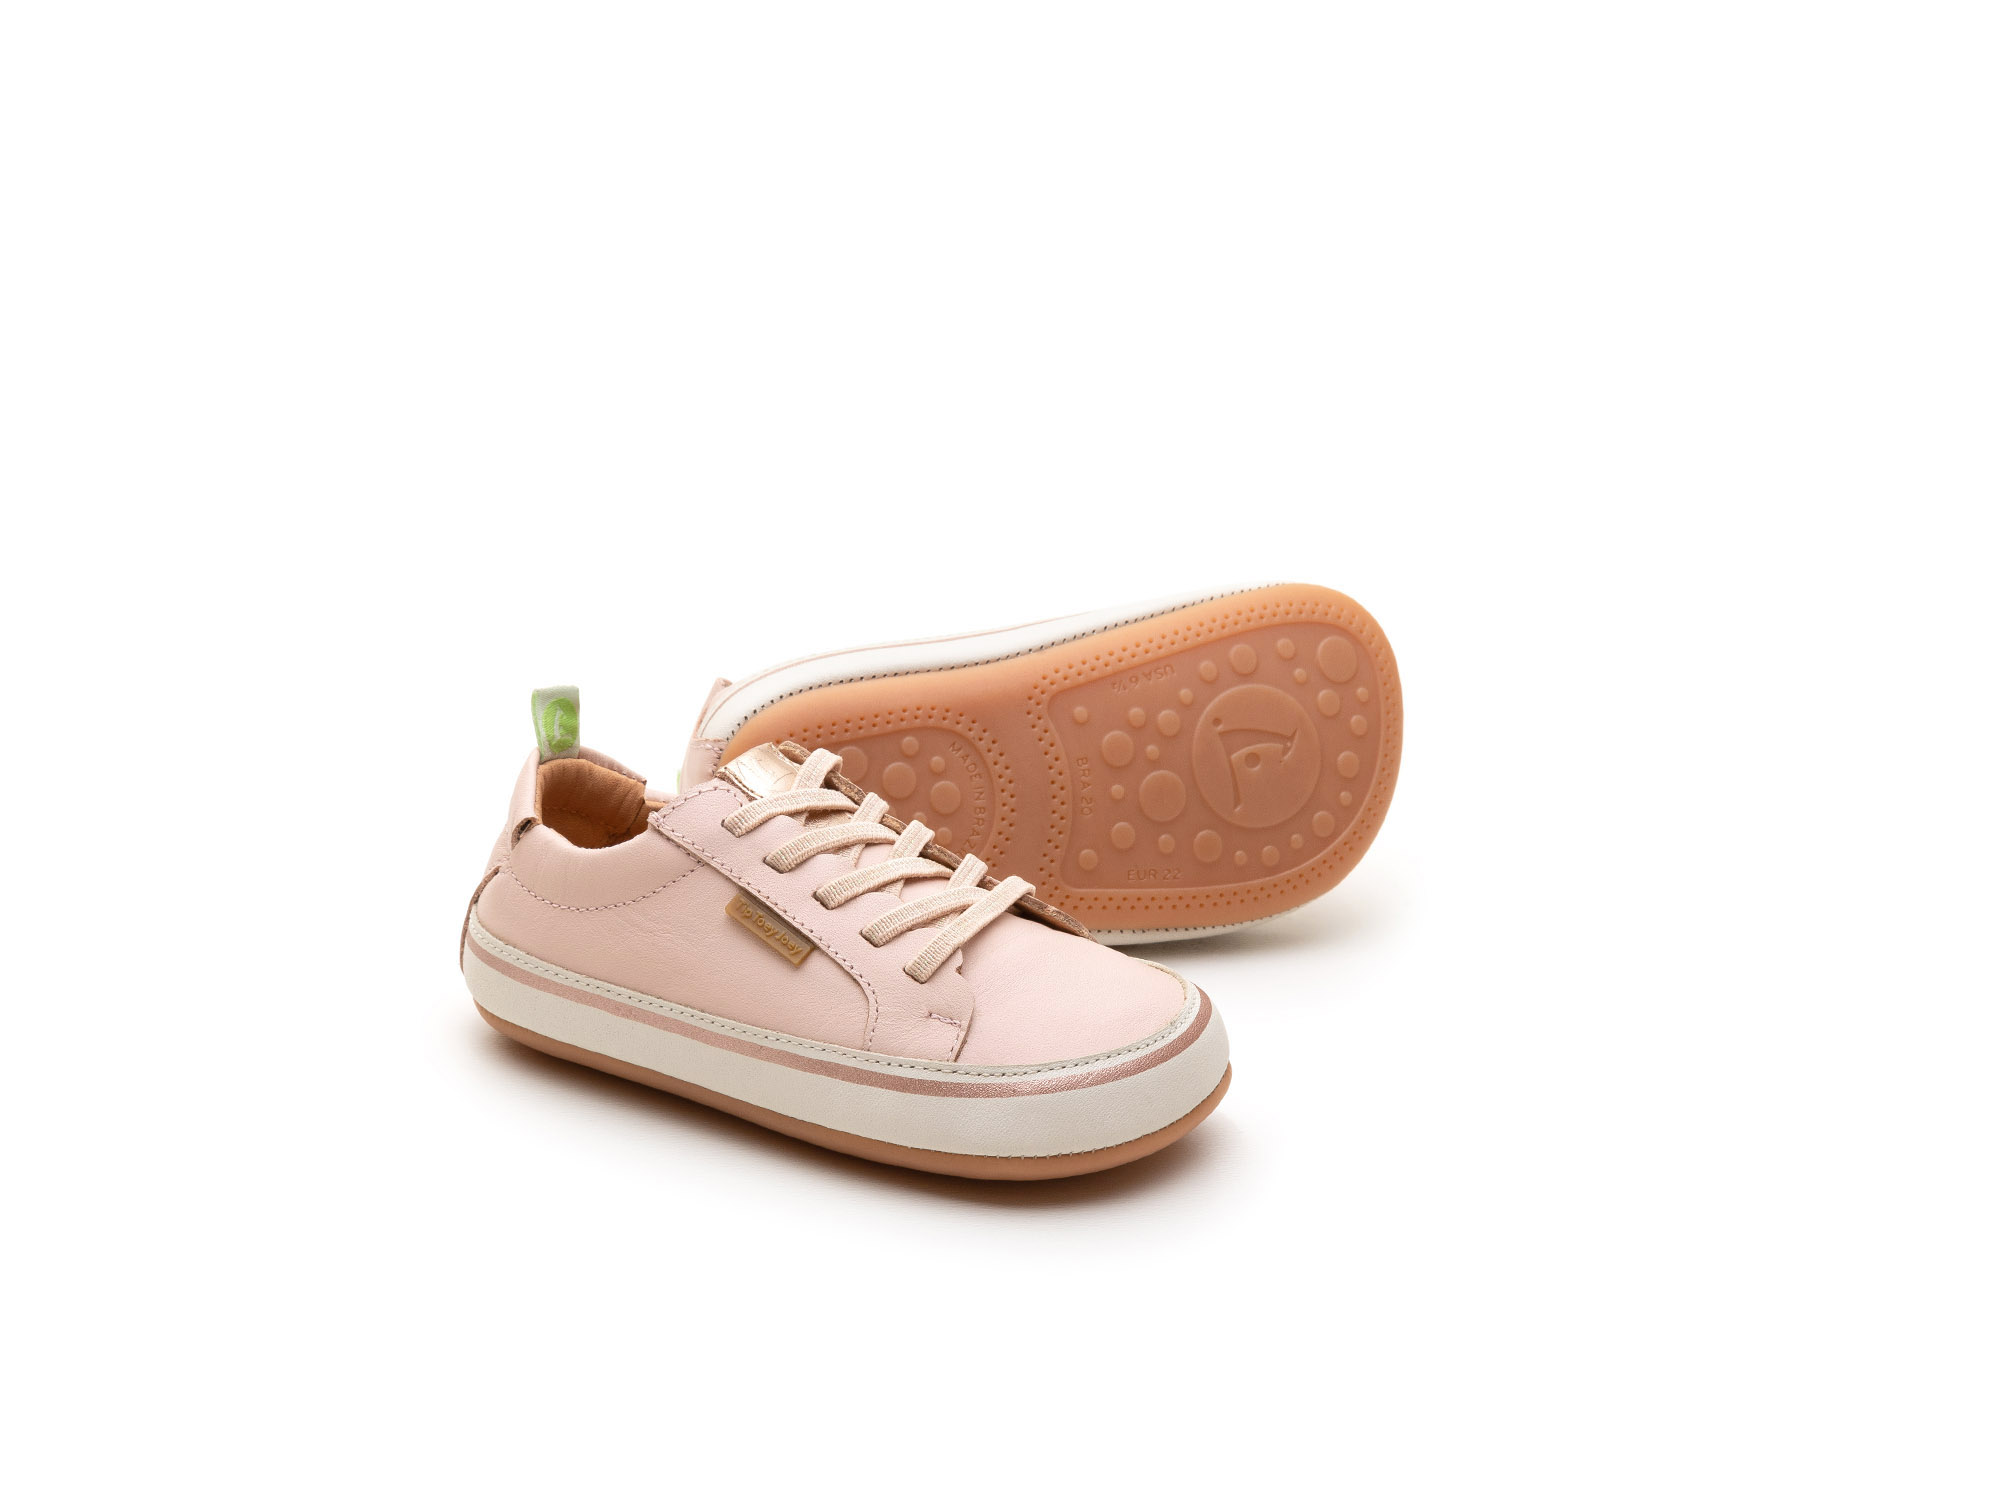 UP & GO Sneakers for Girls Puffy | Tip Toey Joey - Australia - 0